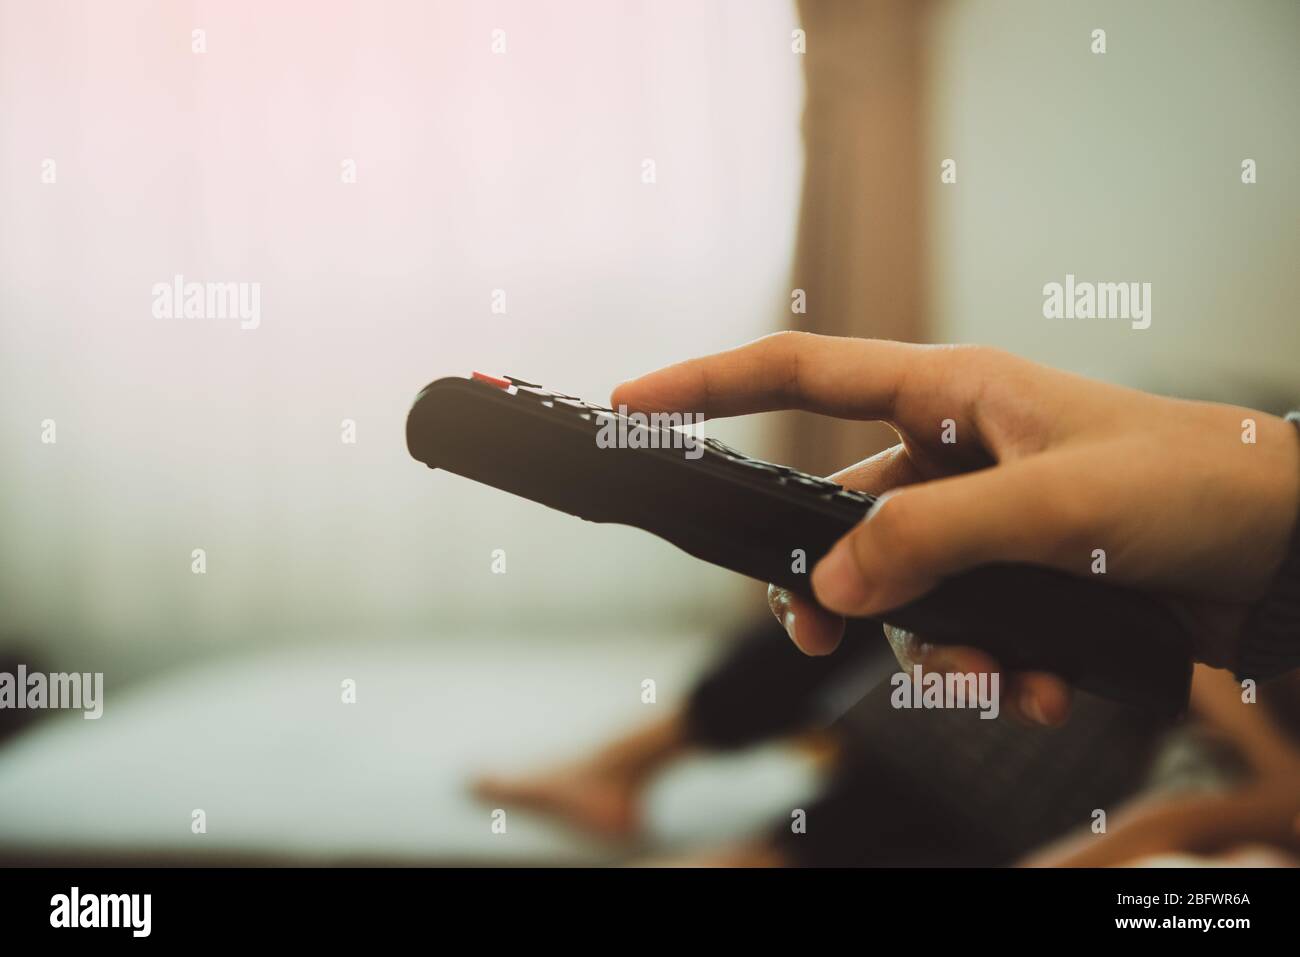 Close-up of young woman holding remote control and turning on the TV while sitting on sofa at home. Stop the virus Covid-19.Stay at home Concept. Stock Photo